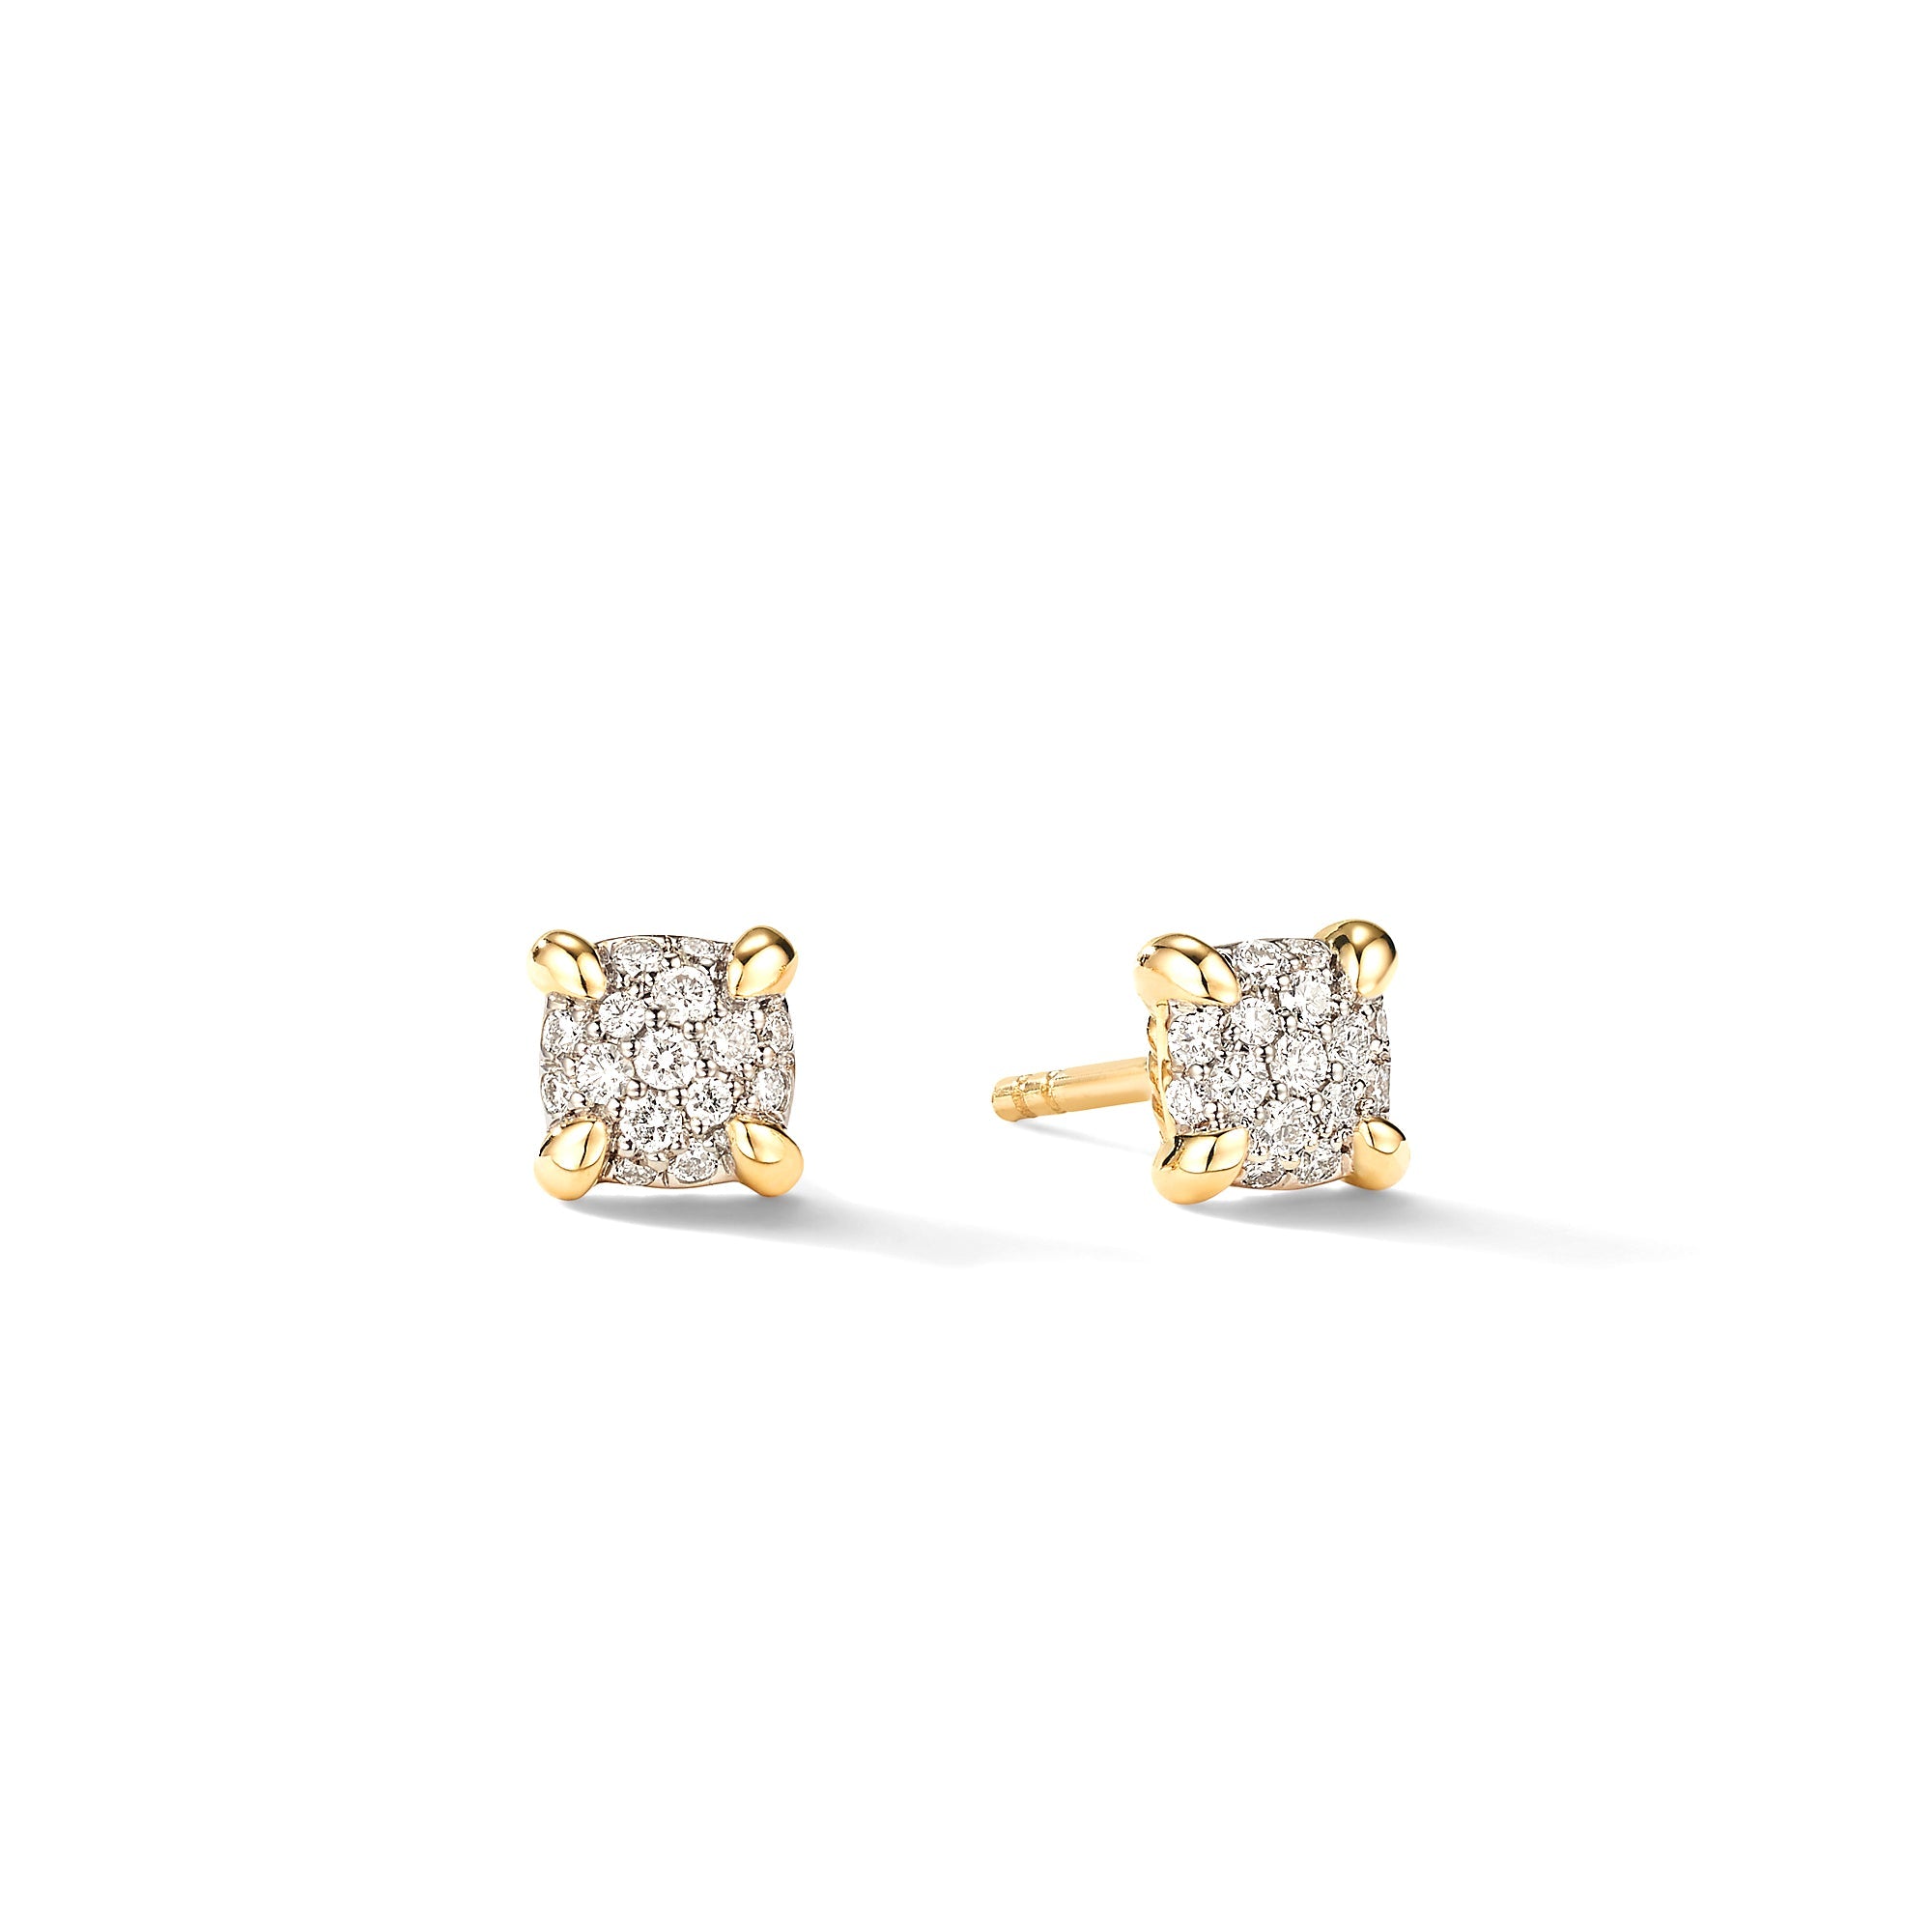 Petite Chatelaine® Stud Earrings in 18ct Yellow Gold with Pavé Diamonds